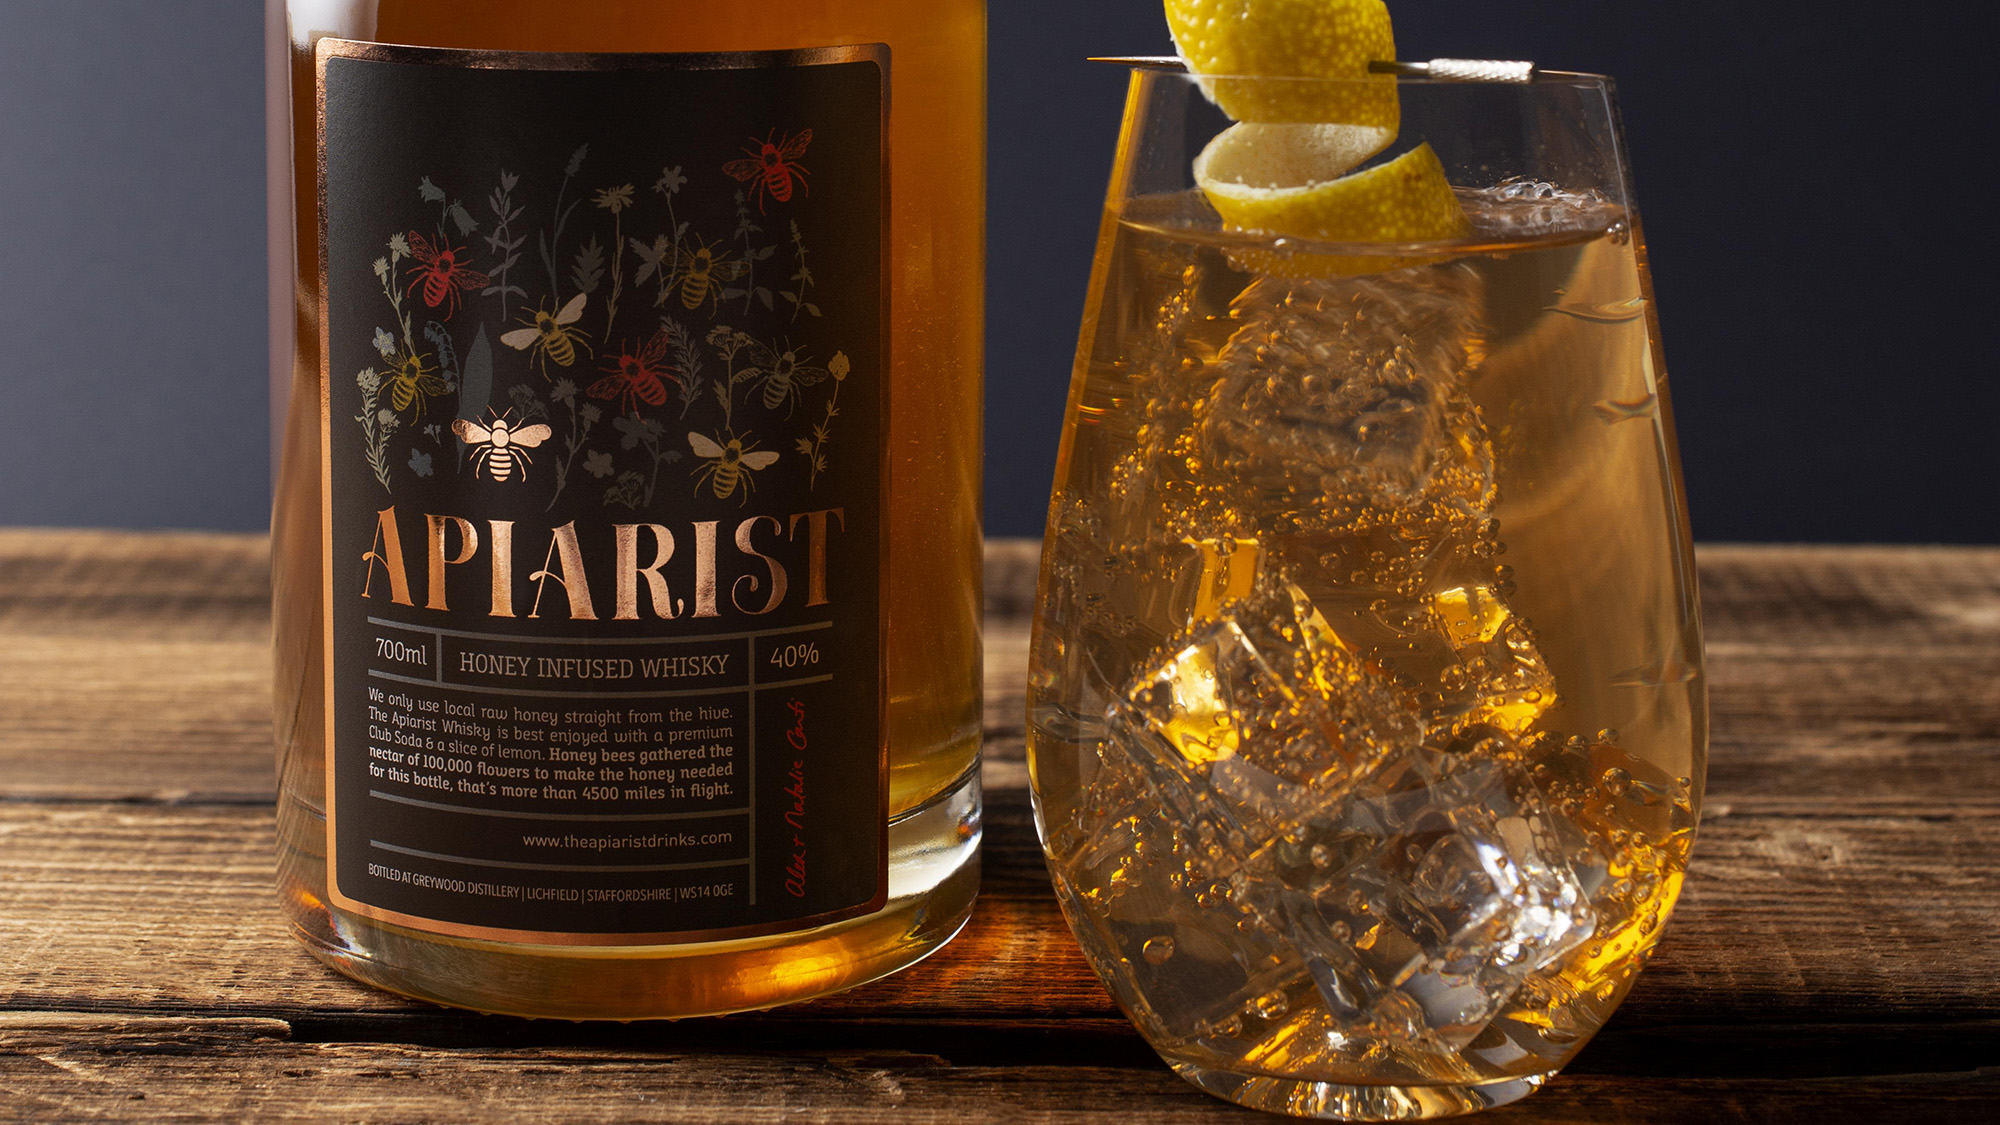 The Apiarist Whisky